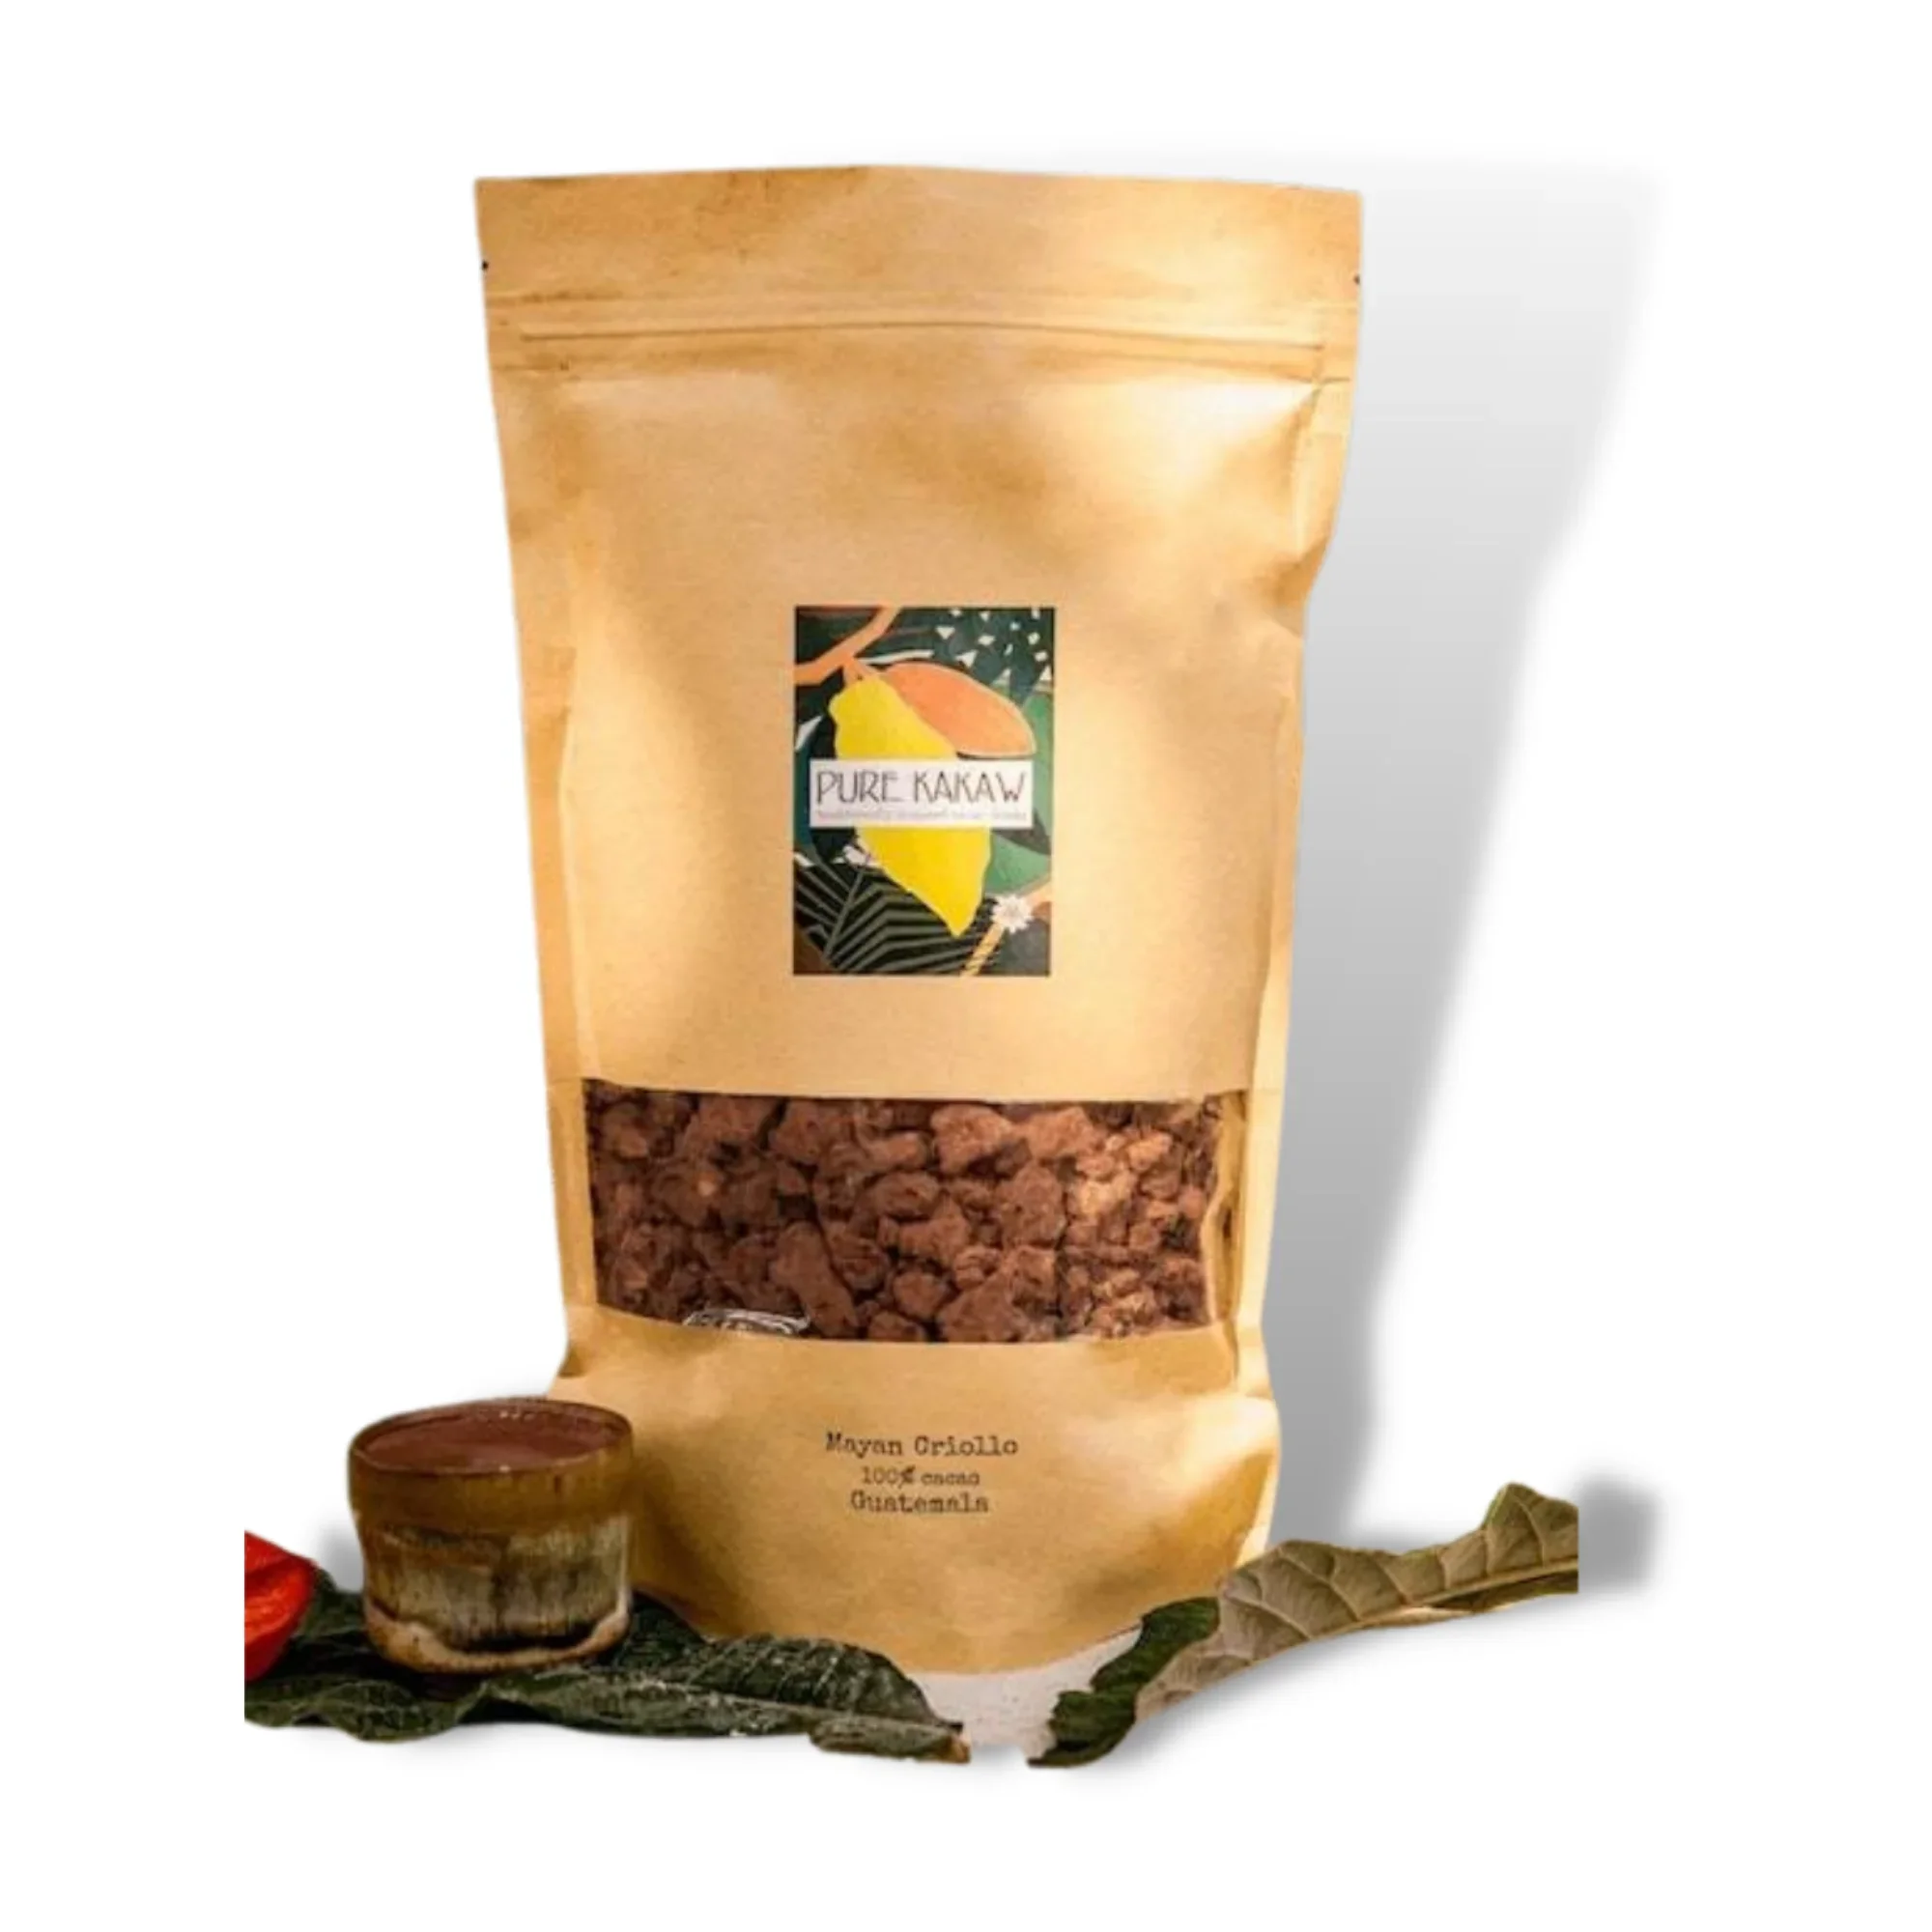 Microdose - Pure Cacao flakes, 125g, Ceremoniële Kakaw 